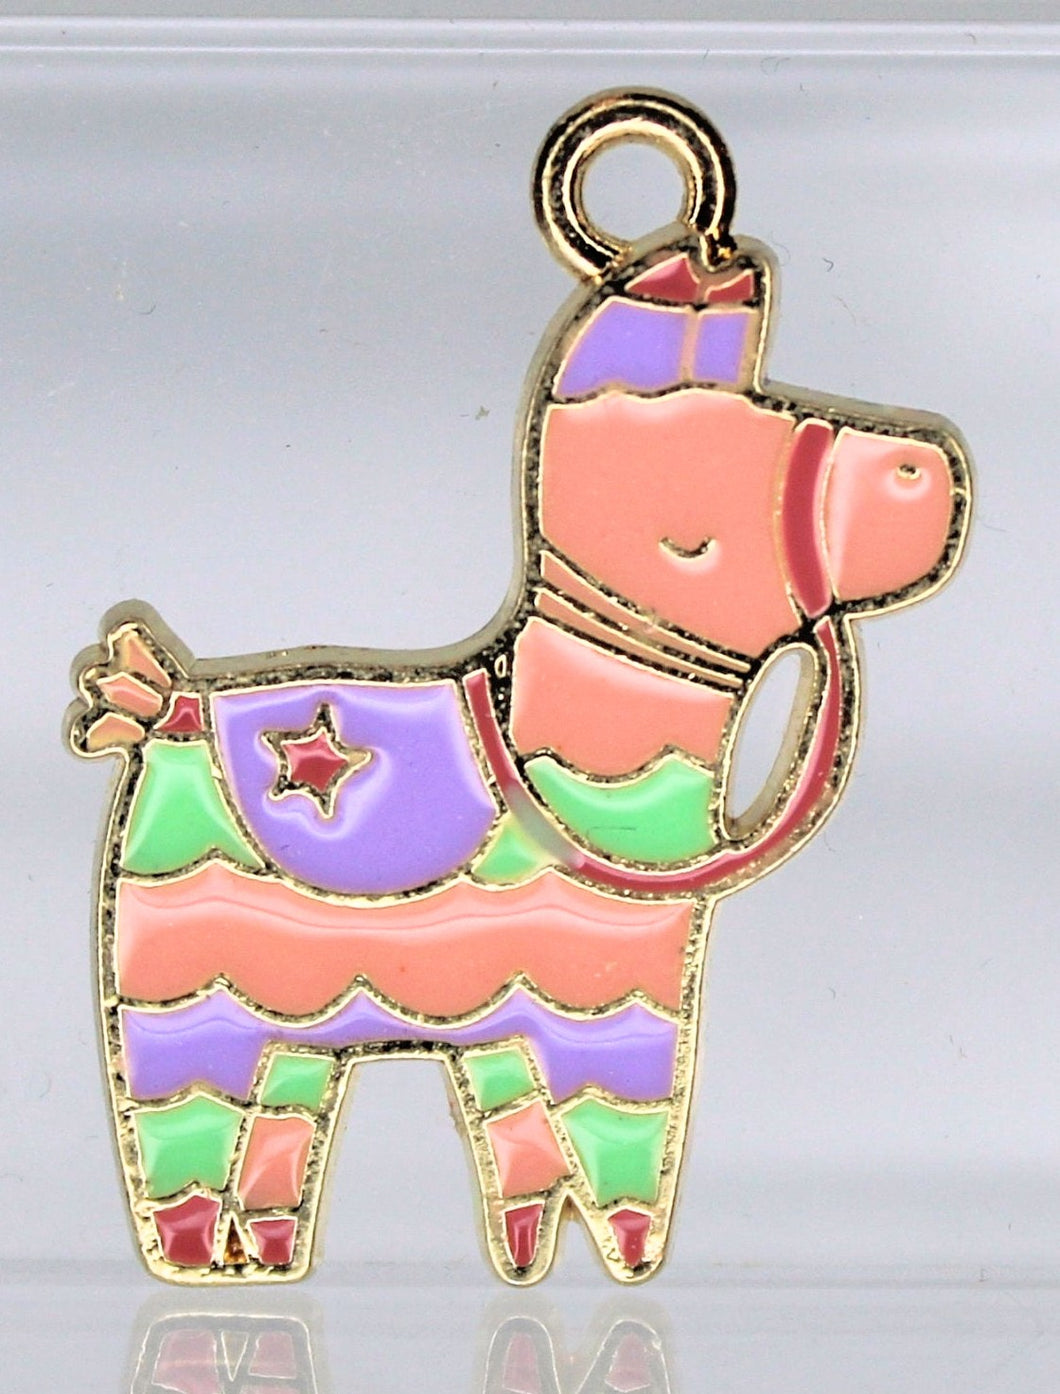 Pinata Charms, bright colored Pinata charms, These lama charms are adorable and very colorful. Check them out.